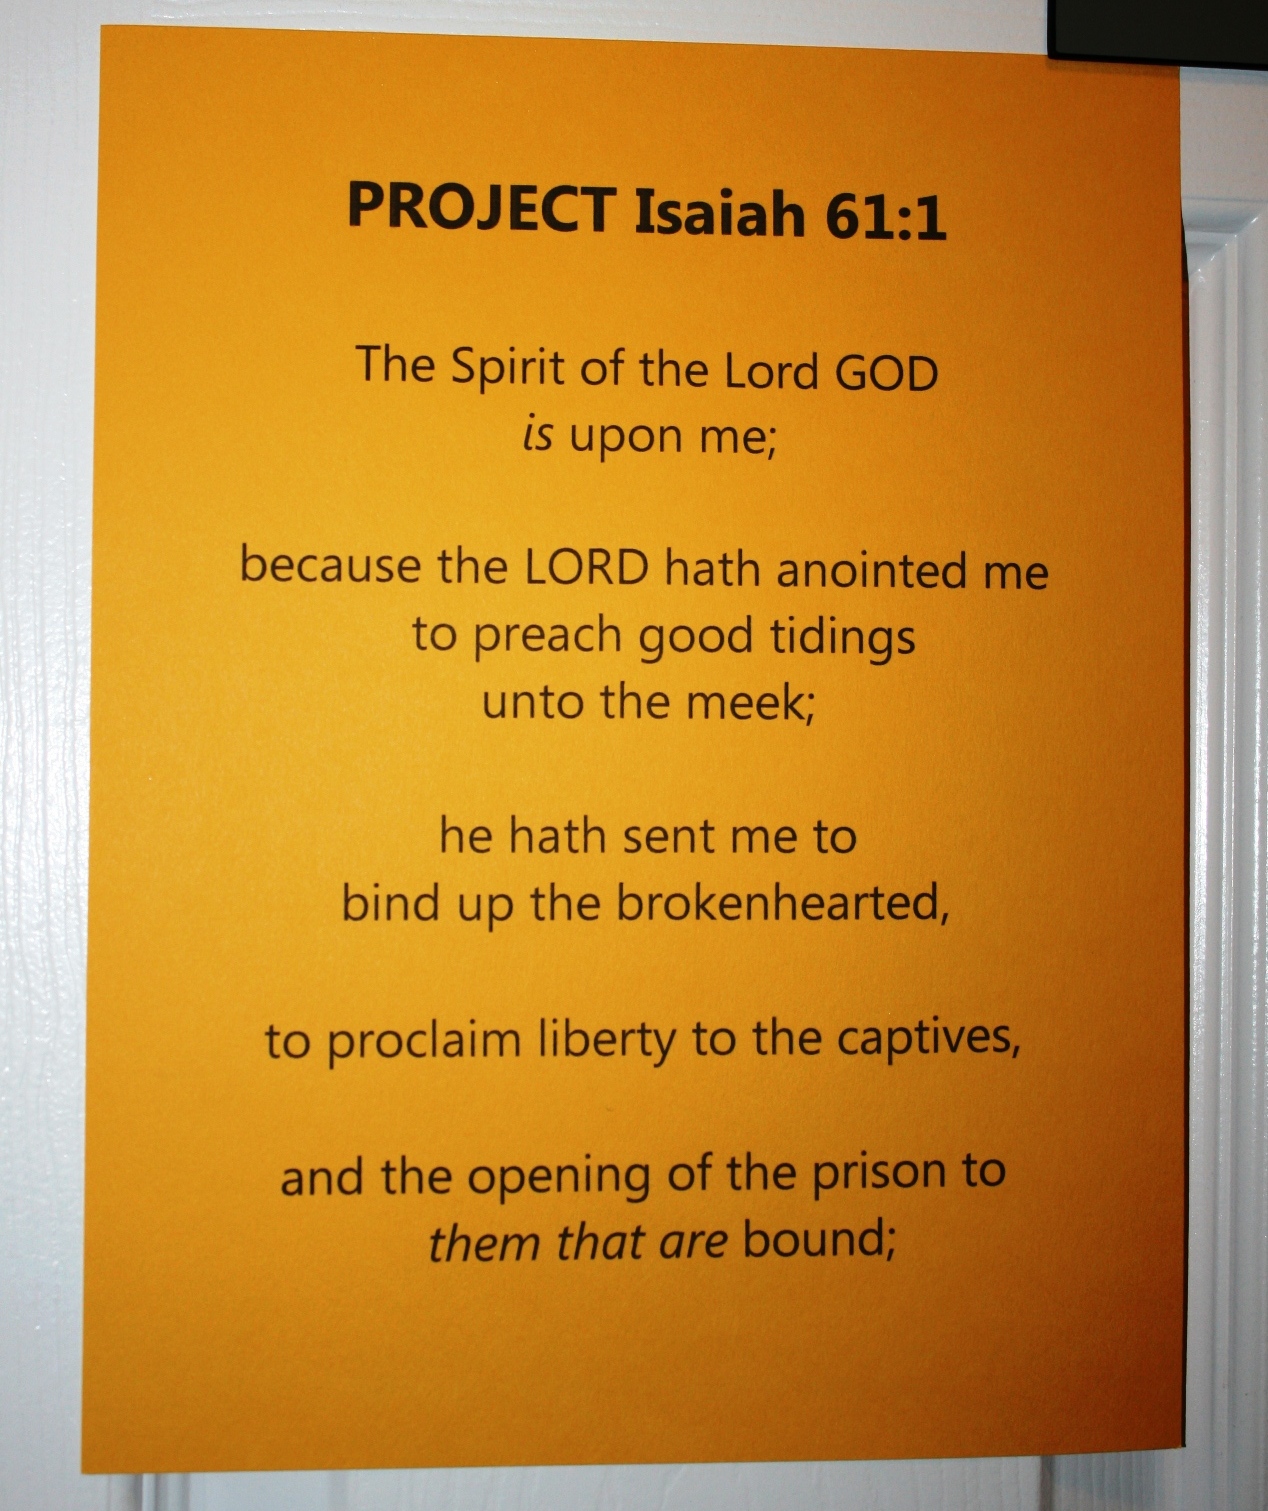 PROJECT ISAIAH 61:1